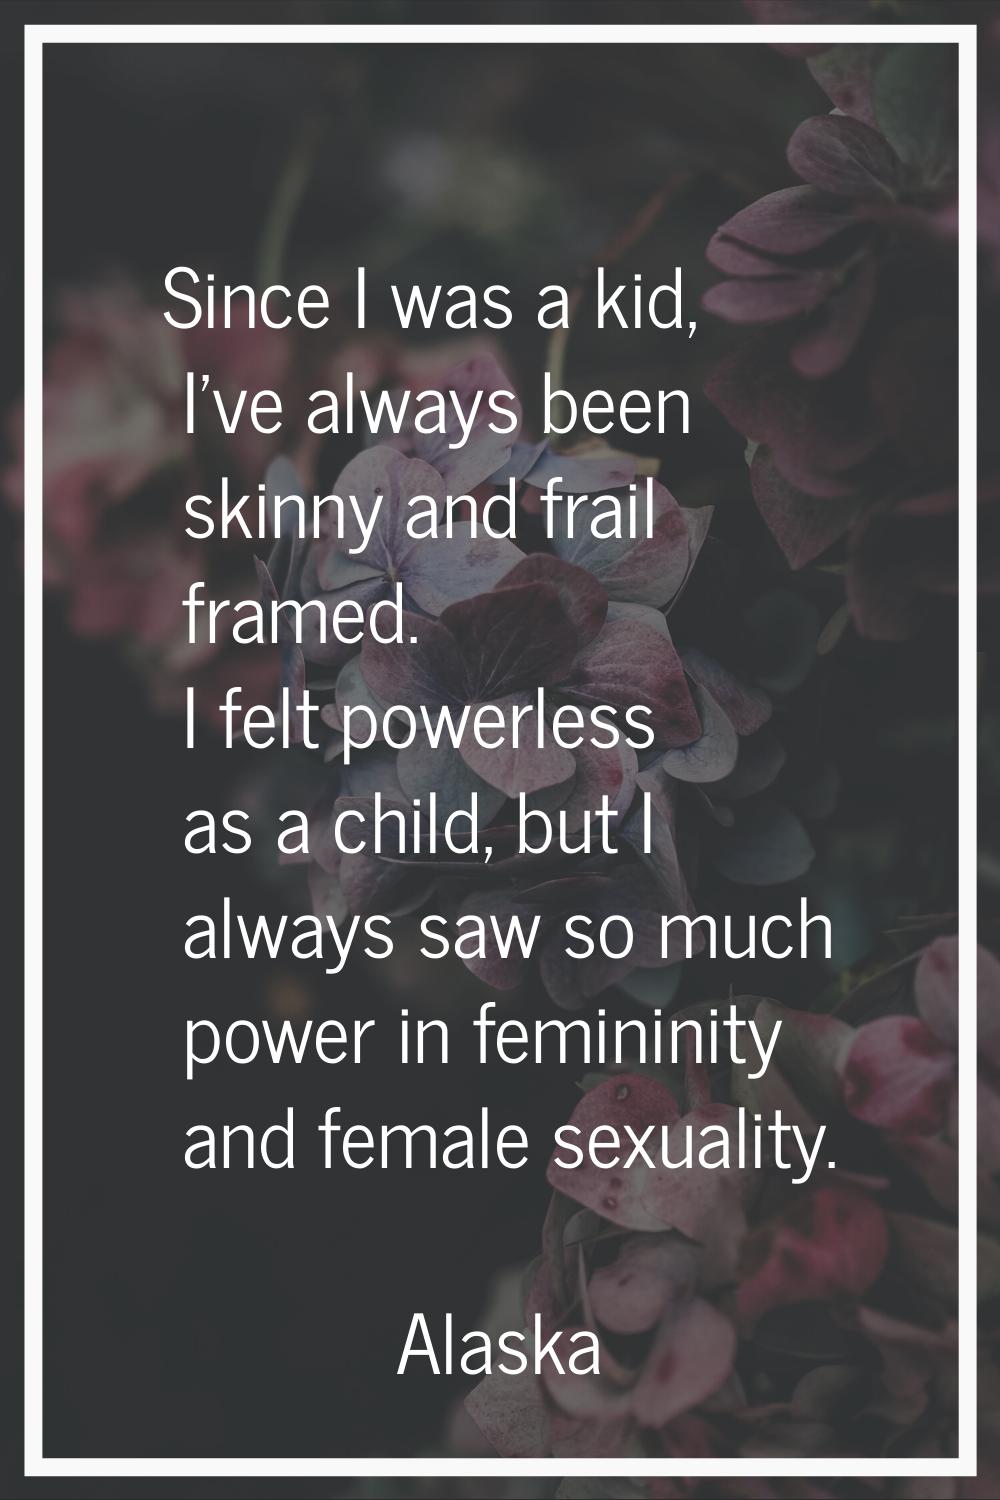 Since I was a kid, I've always been skinny and frail framed. I felt powerless as a child, but I alw